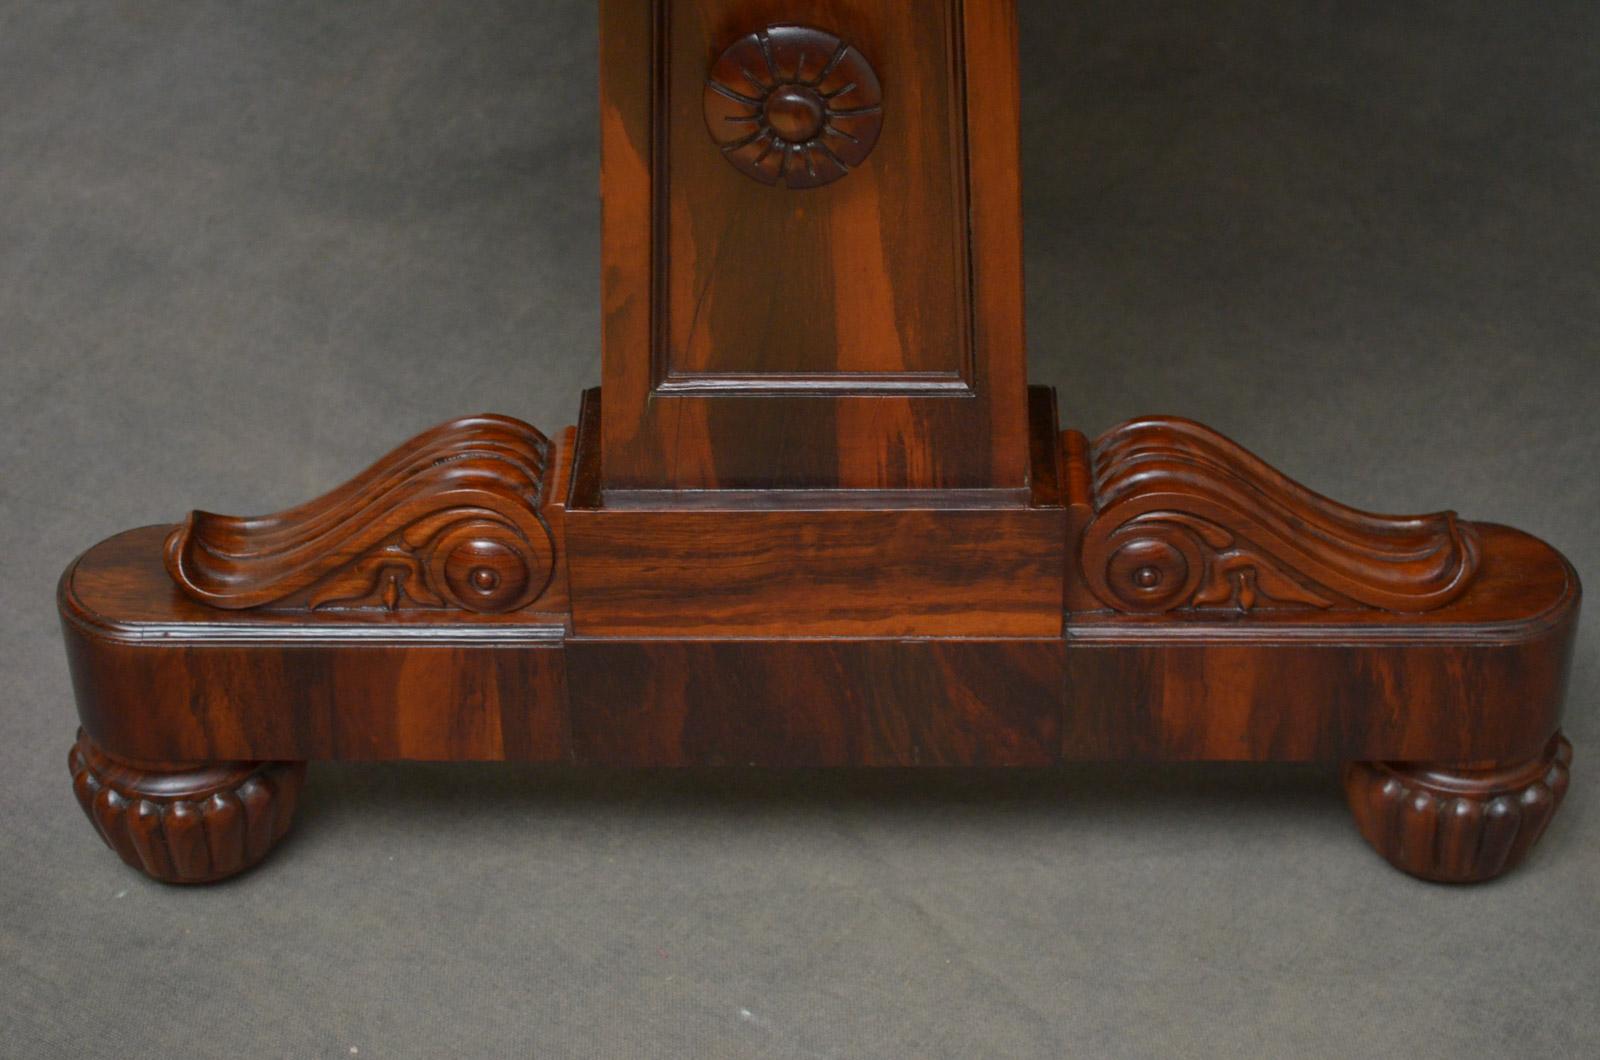 Exceptional Regency Goncalo Alves Library Table in the Manner of Gillows 8